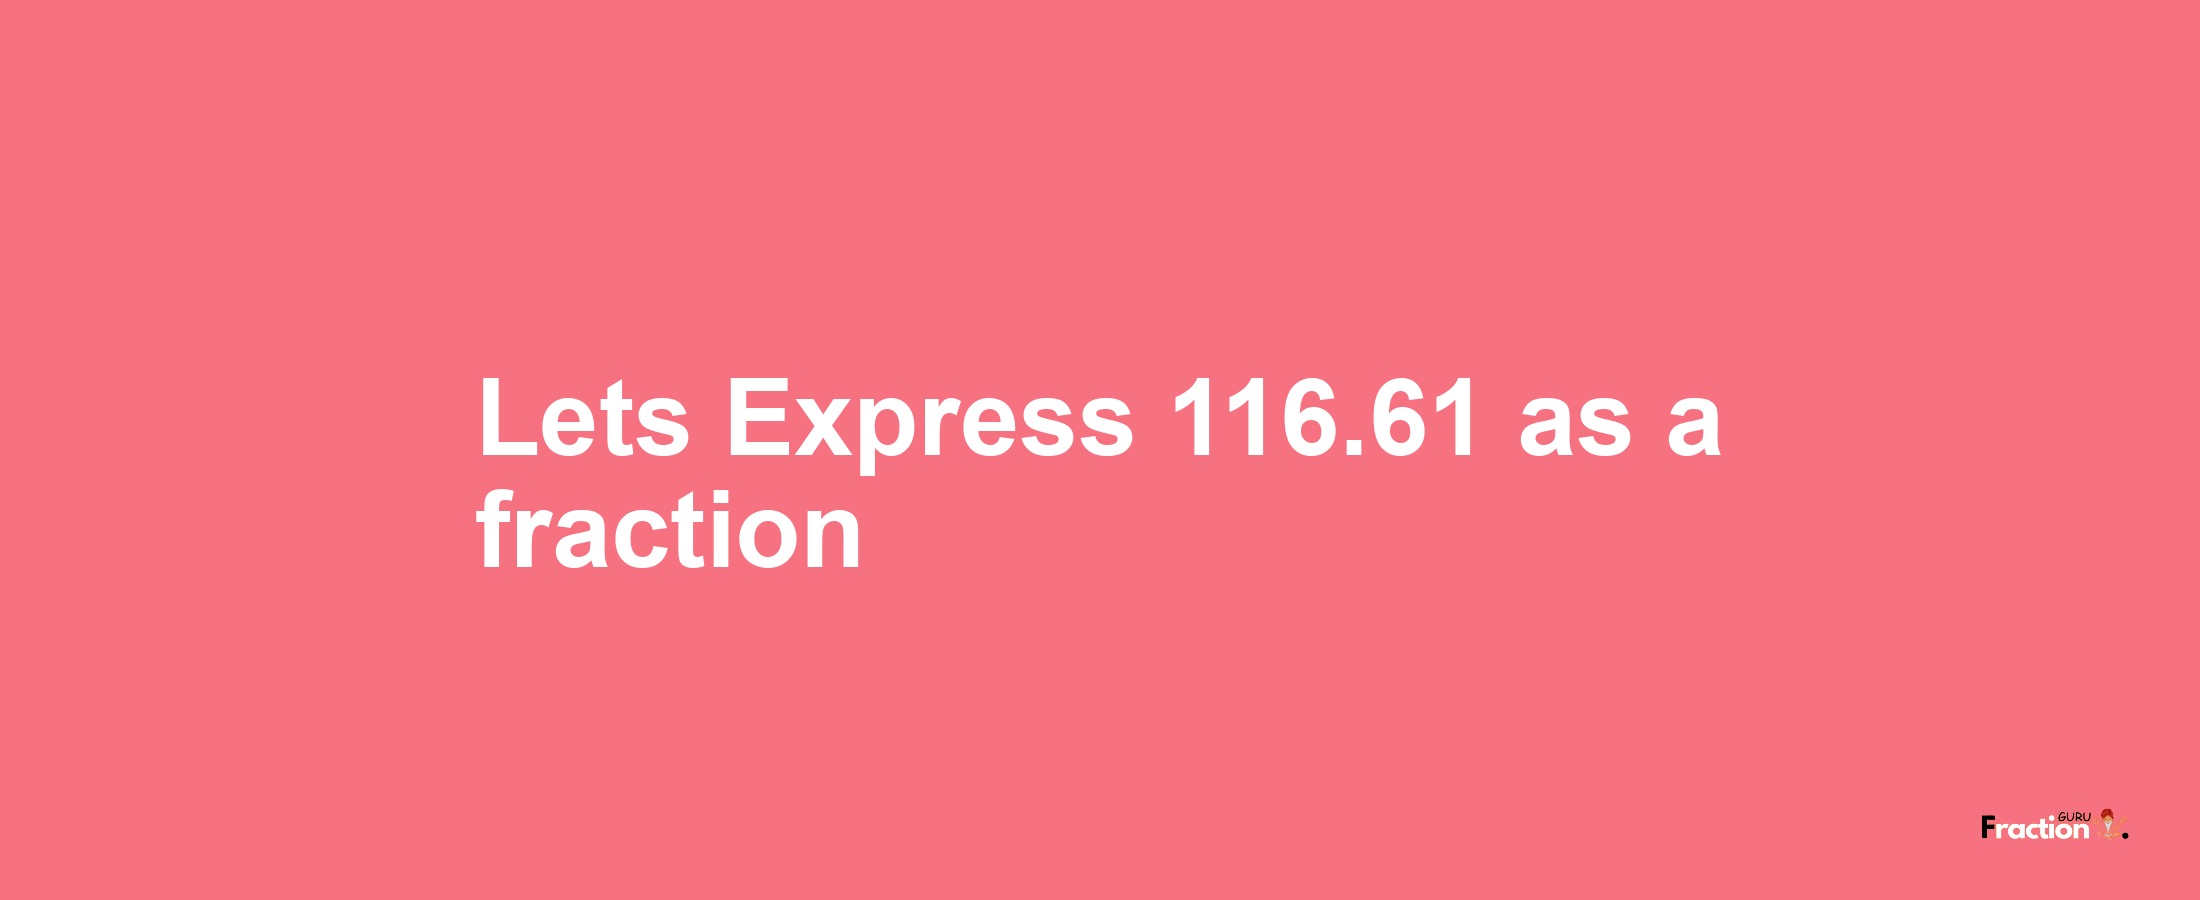 Lets Express 116.61 as afraction